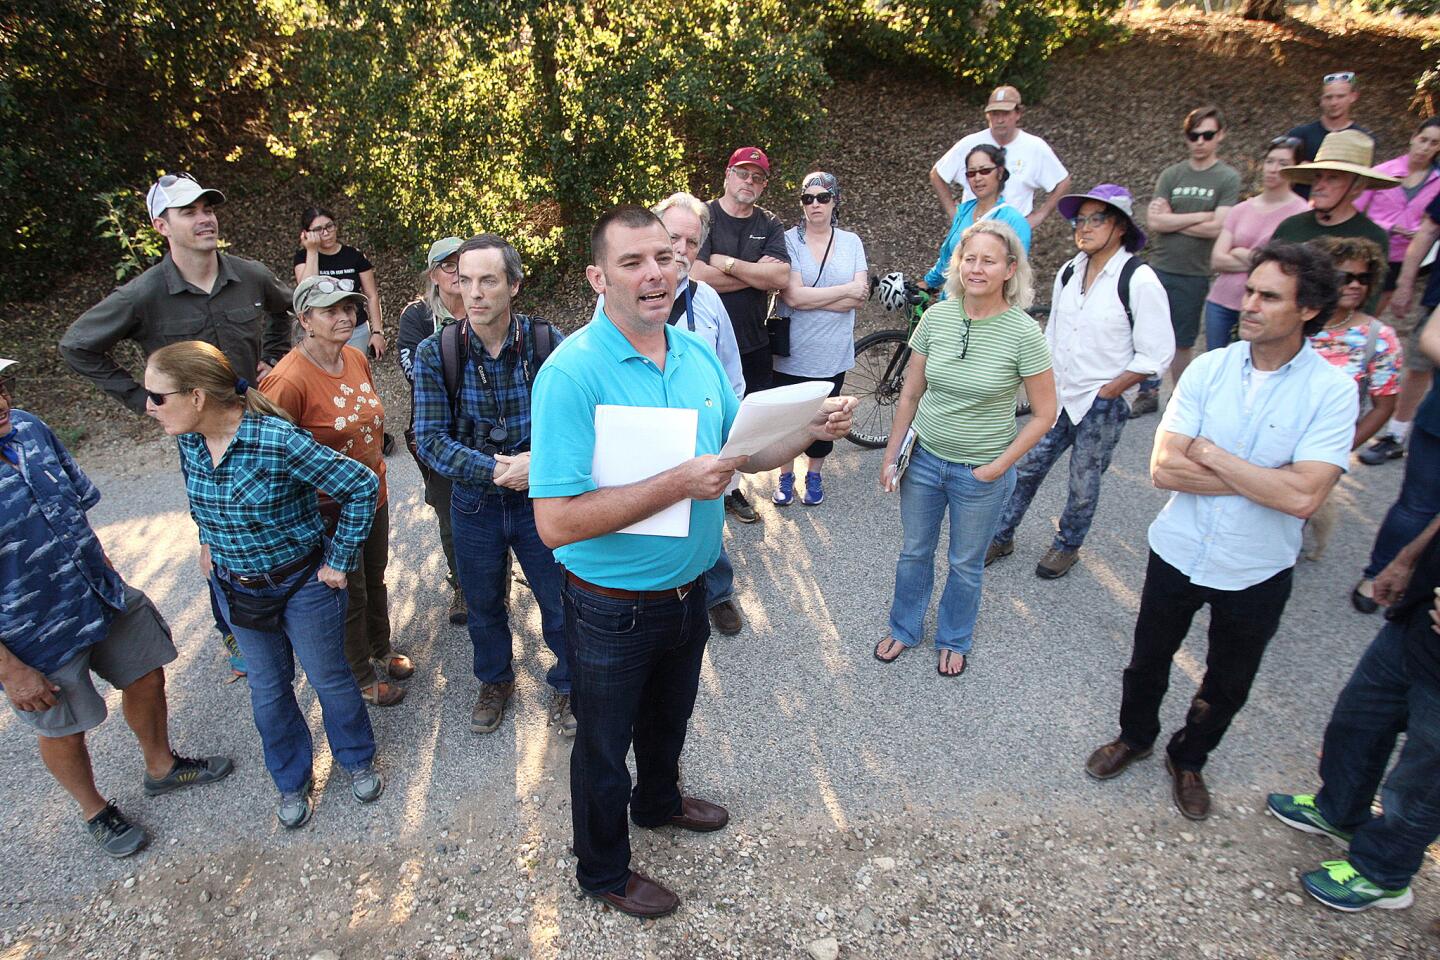 Assistant City Engineer for the City of Pasadena Brent Maue discusses the plan for a grassy area at a tour of the Berkshire Creek at Hahamongna Watershed Park in La Canada Flintridge on Wednesday, June 19, 2019. The Berkshire Creek Area Improvement Project is an Urban Streams Restoration program that will upgrade habitat, improve public safety and restore more natural hydrology to Berkshire Creek. The program is sponsored by ASF and the city of Pasadena.